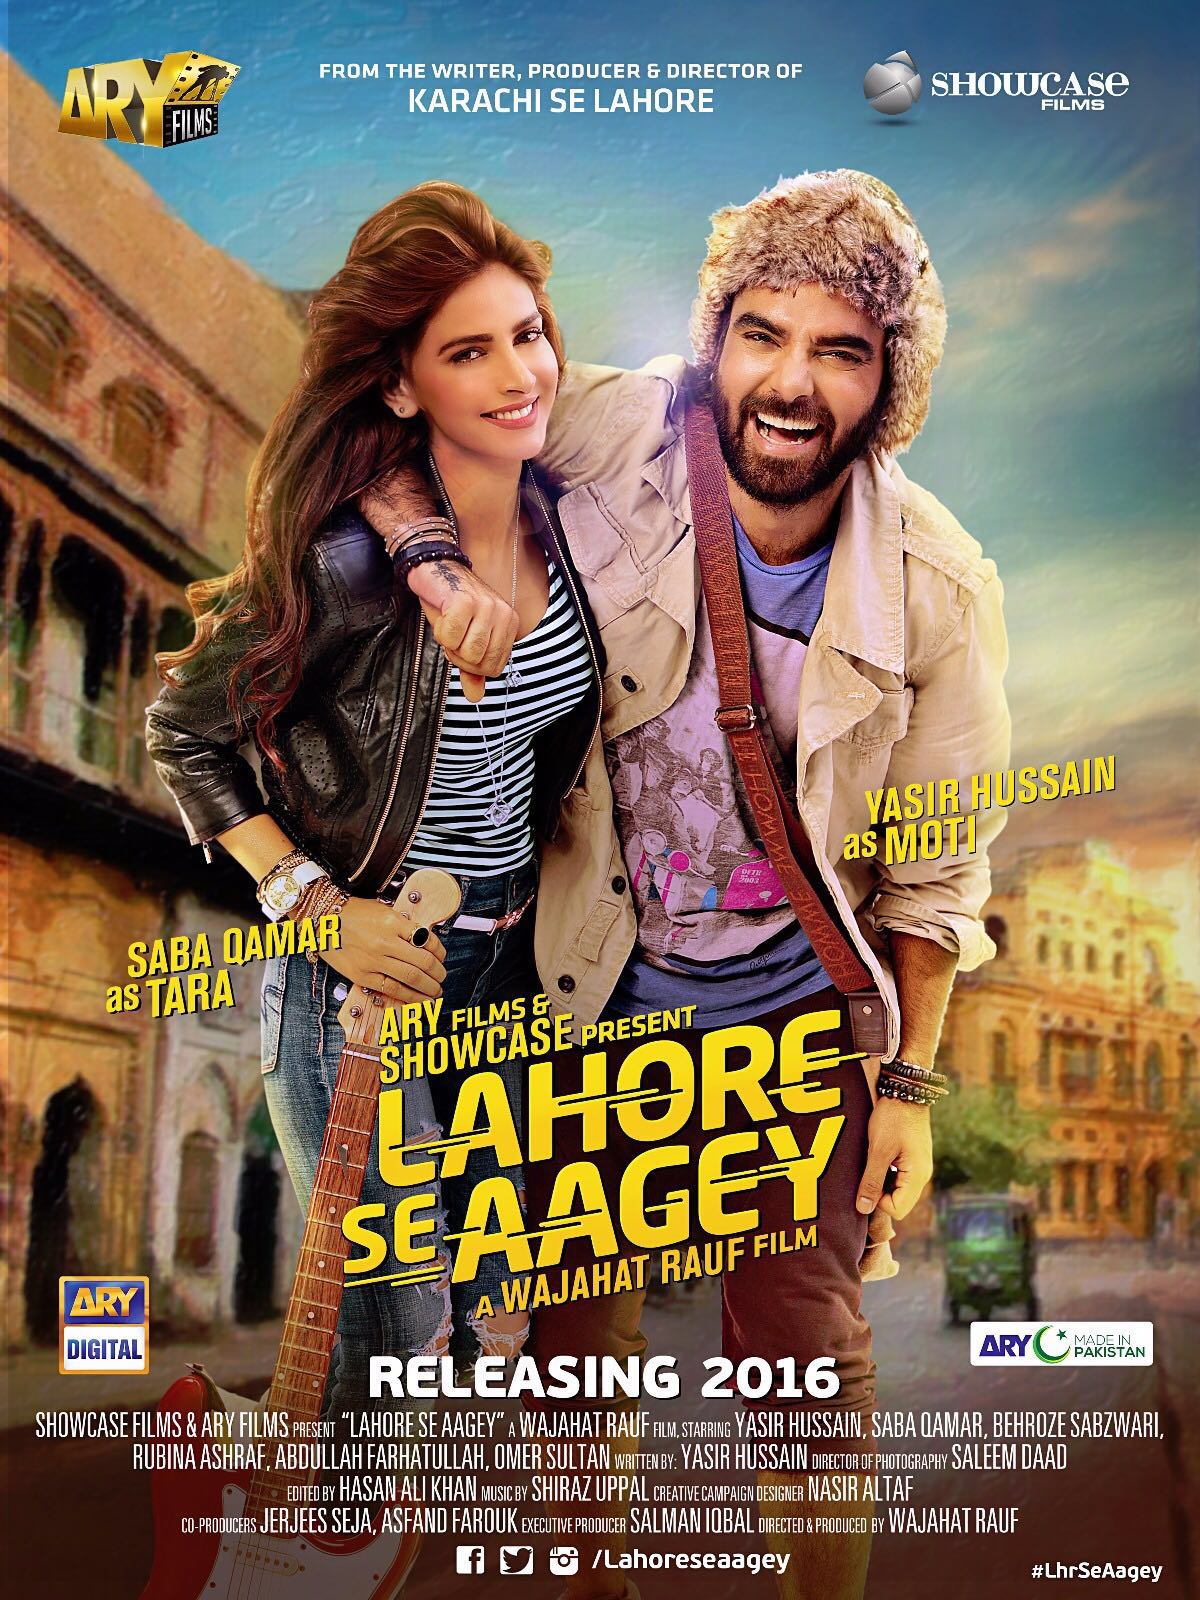 First look of #LahoreSeAagey